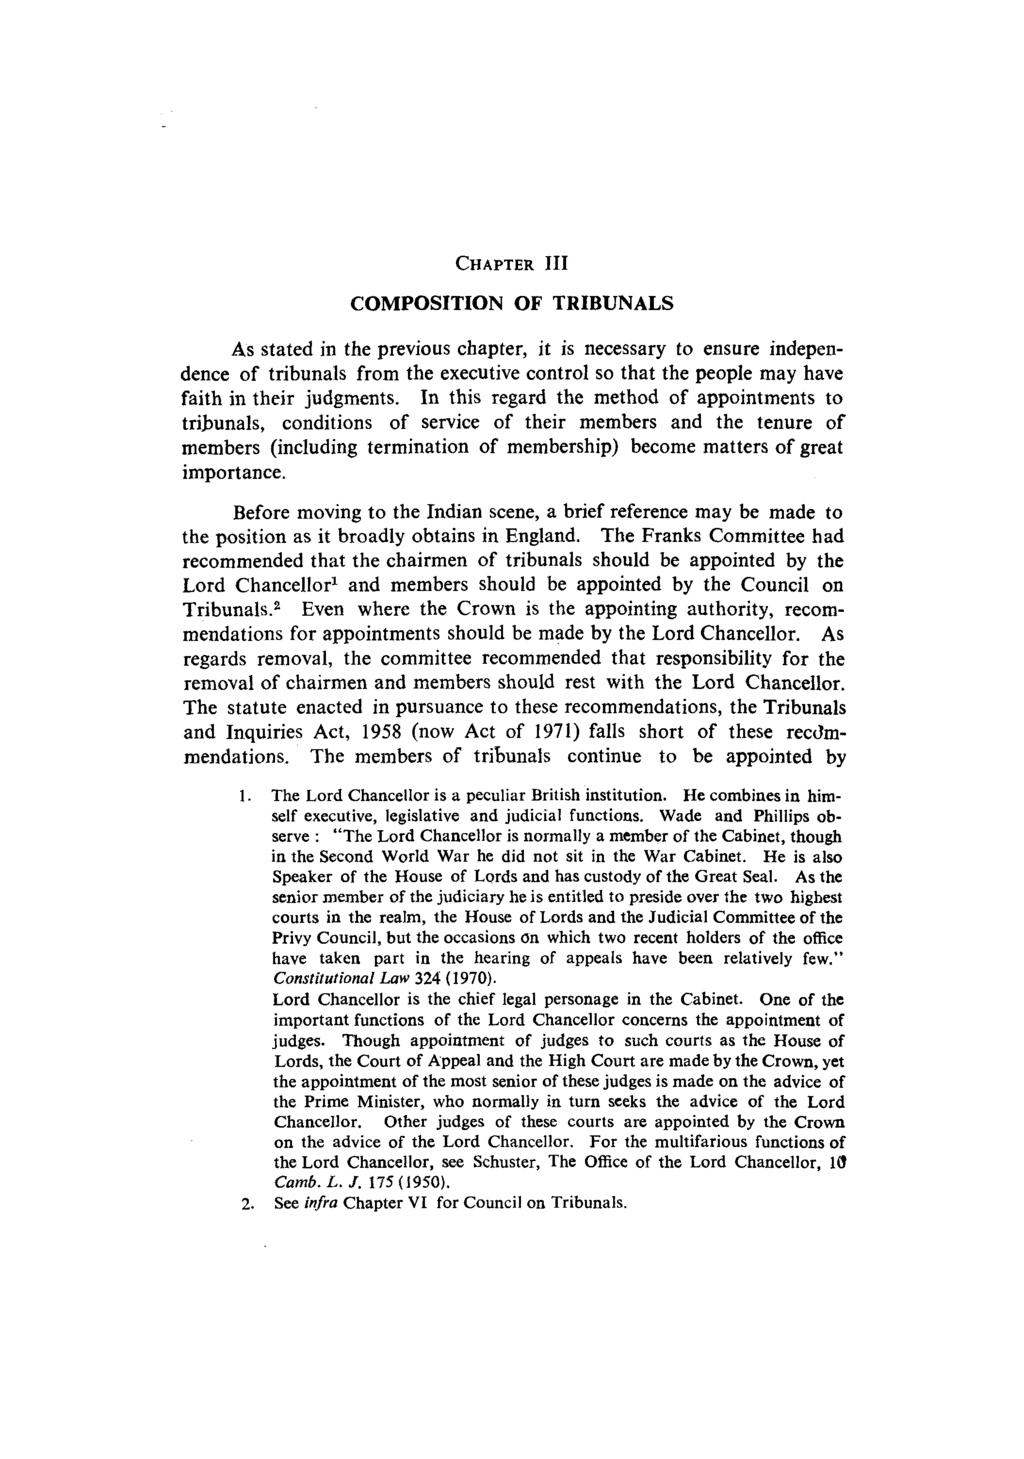 CHAPTER III COMPOSITION OF TRIBUNALS As stated in the previous chapter, it is necessary to ensure independence of tribunals from the executive control so that the people may have faith in their